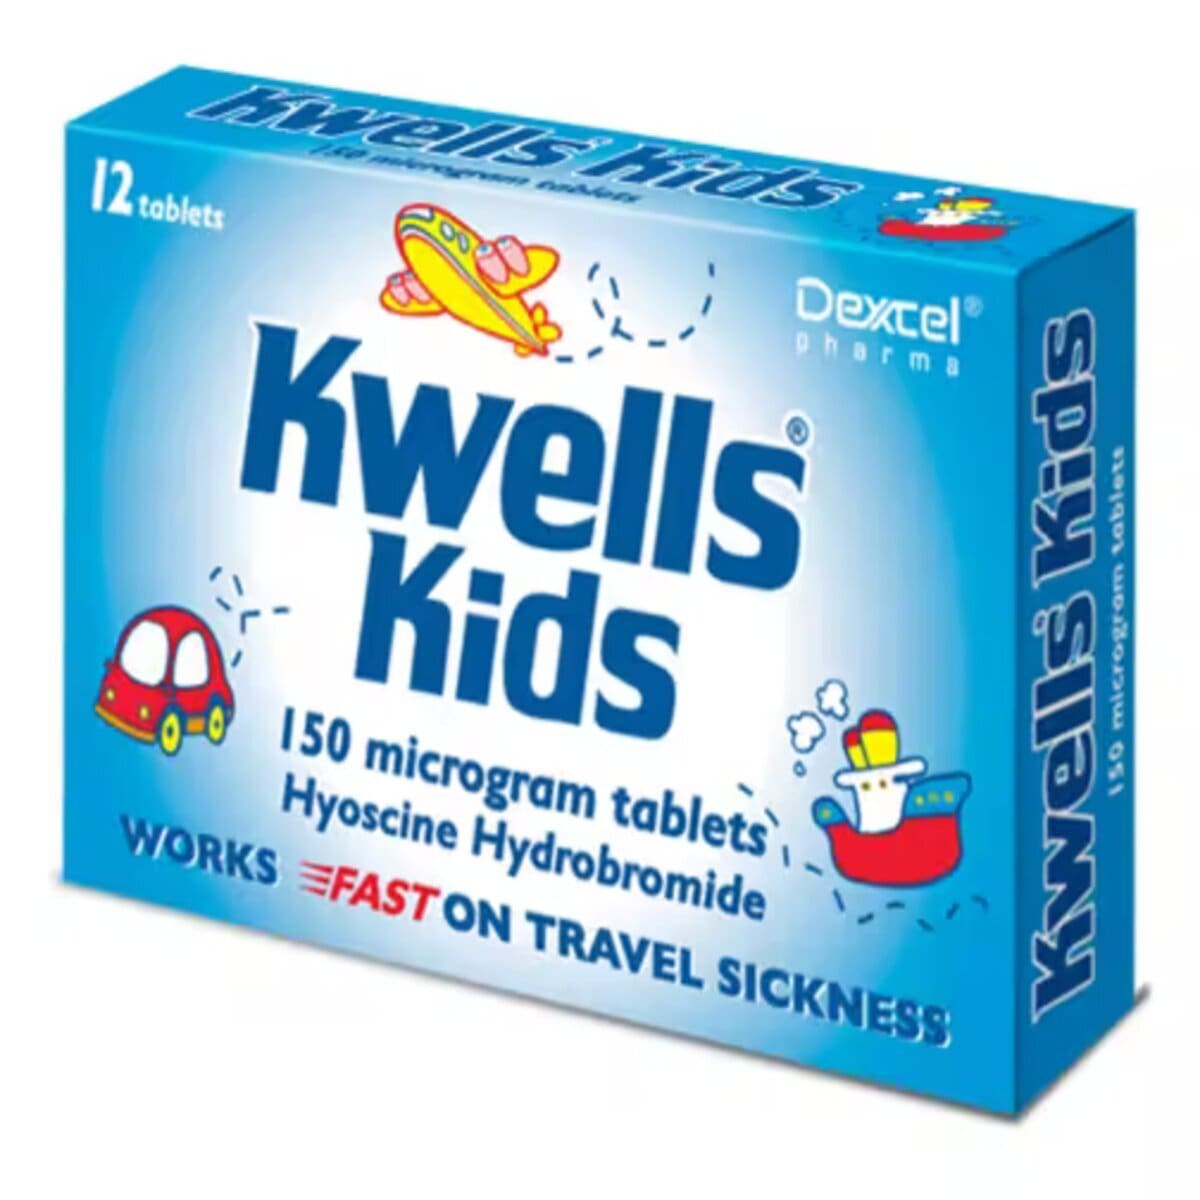 anti travel sickness for toddlers